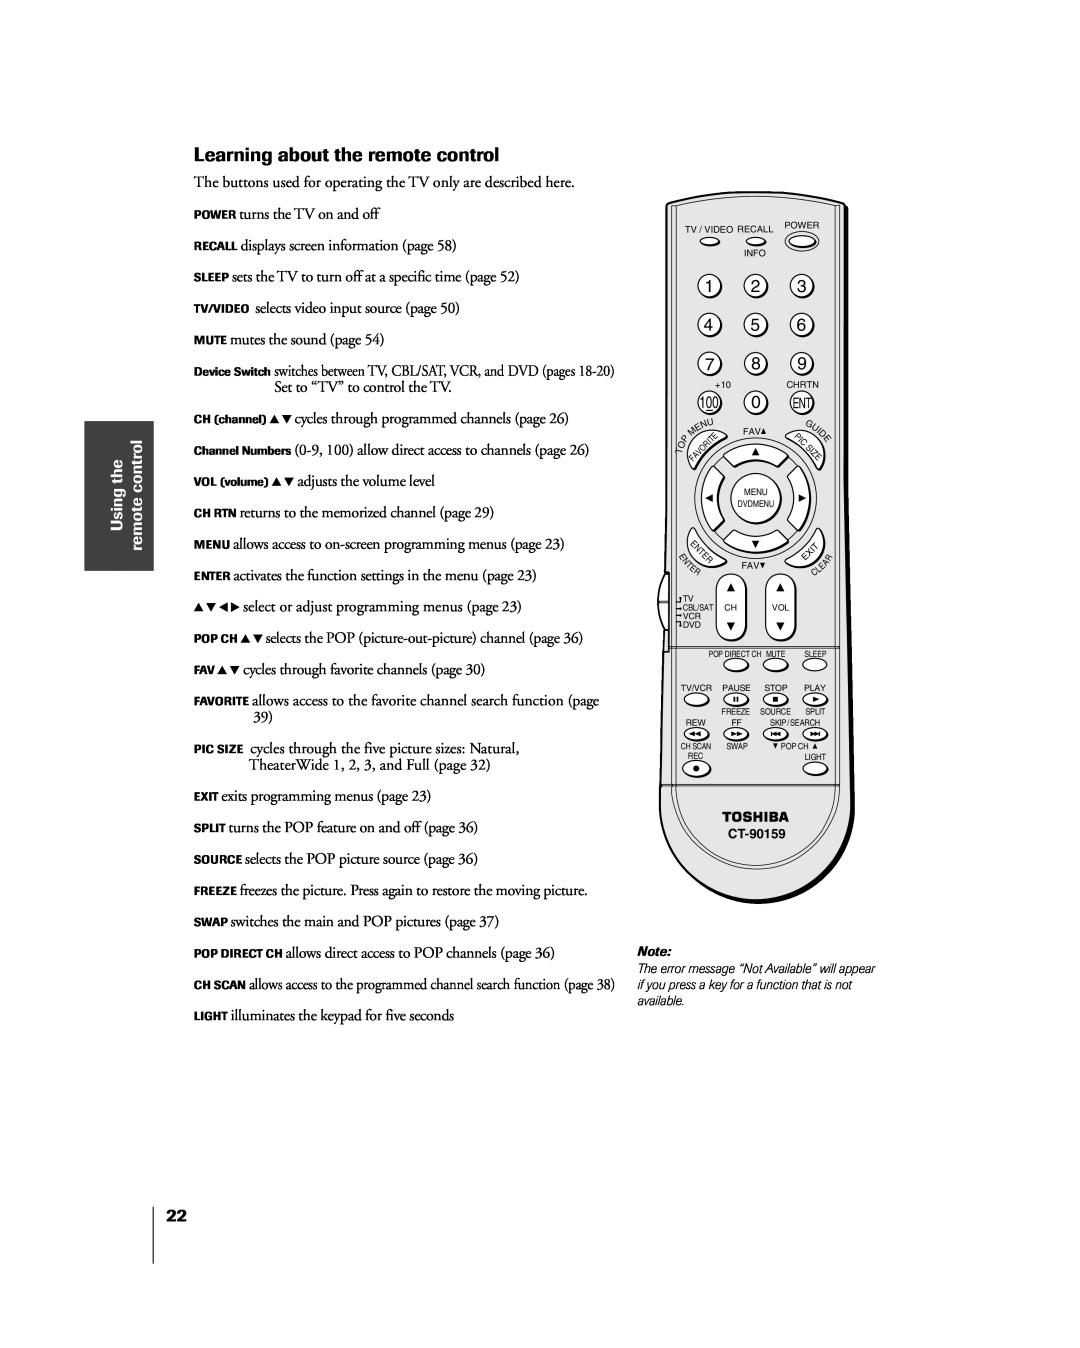 Toshiba 51H85C, 65H85C, 57H85C owner manual Learning about the remote control, the control, Using remote 